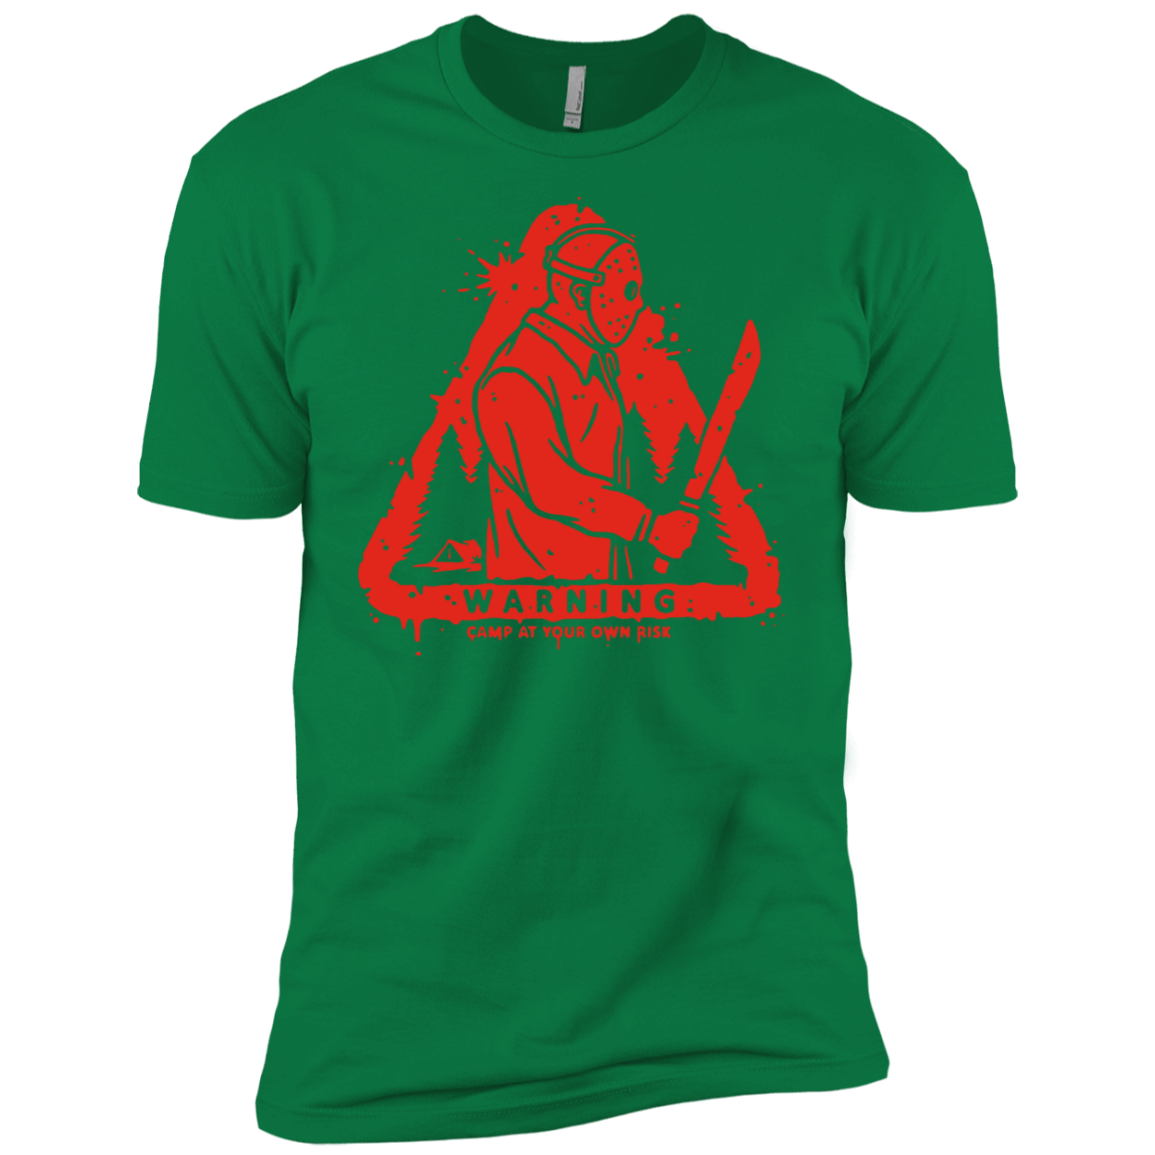 T-Shirts Kelly Green / X-Small Camp at Your Own Risk Men's Premium T-Shirt